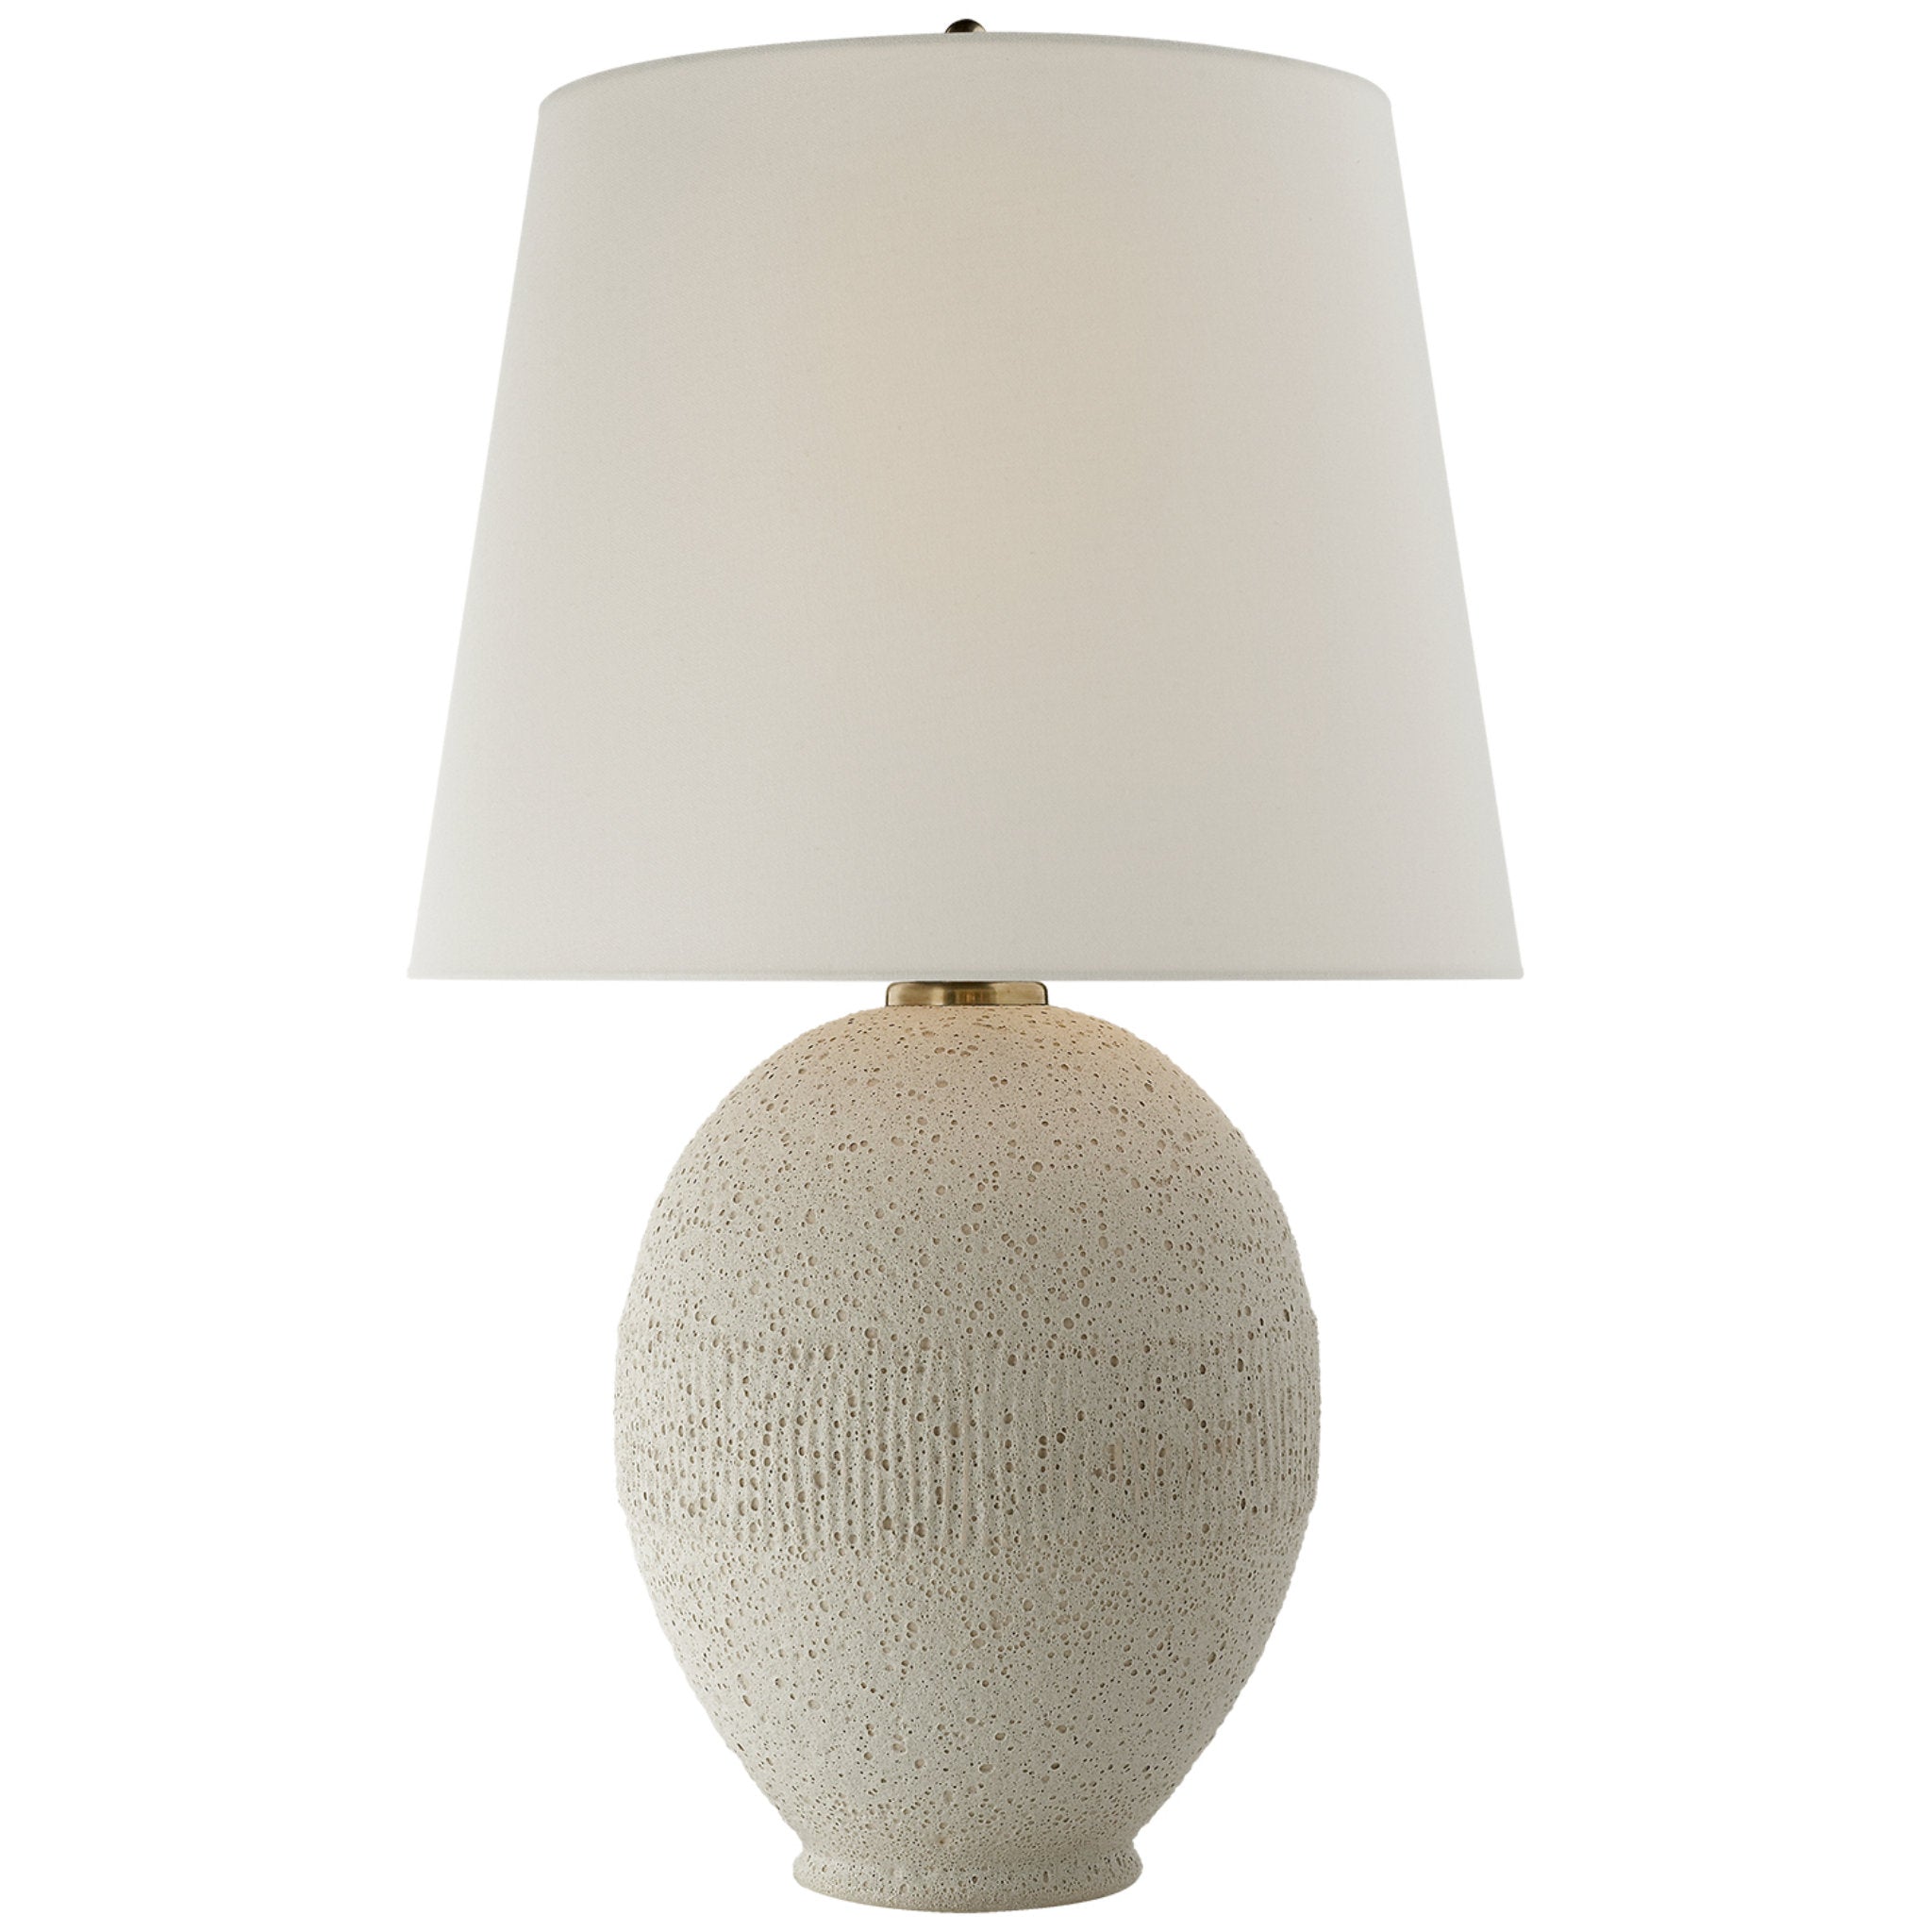 AERIN Olsen Table Lamp in Crystal and Hand-Rubbed Antique Brass with Linen  Shade